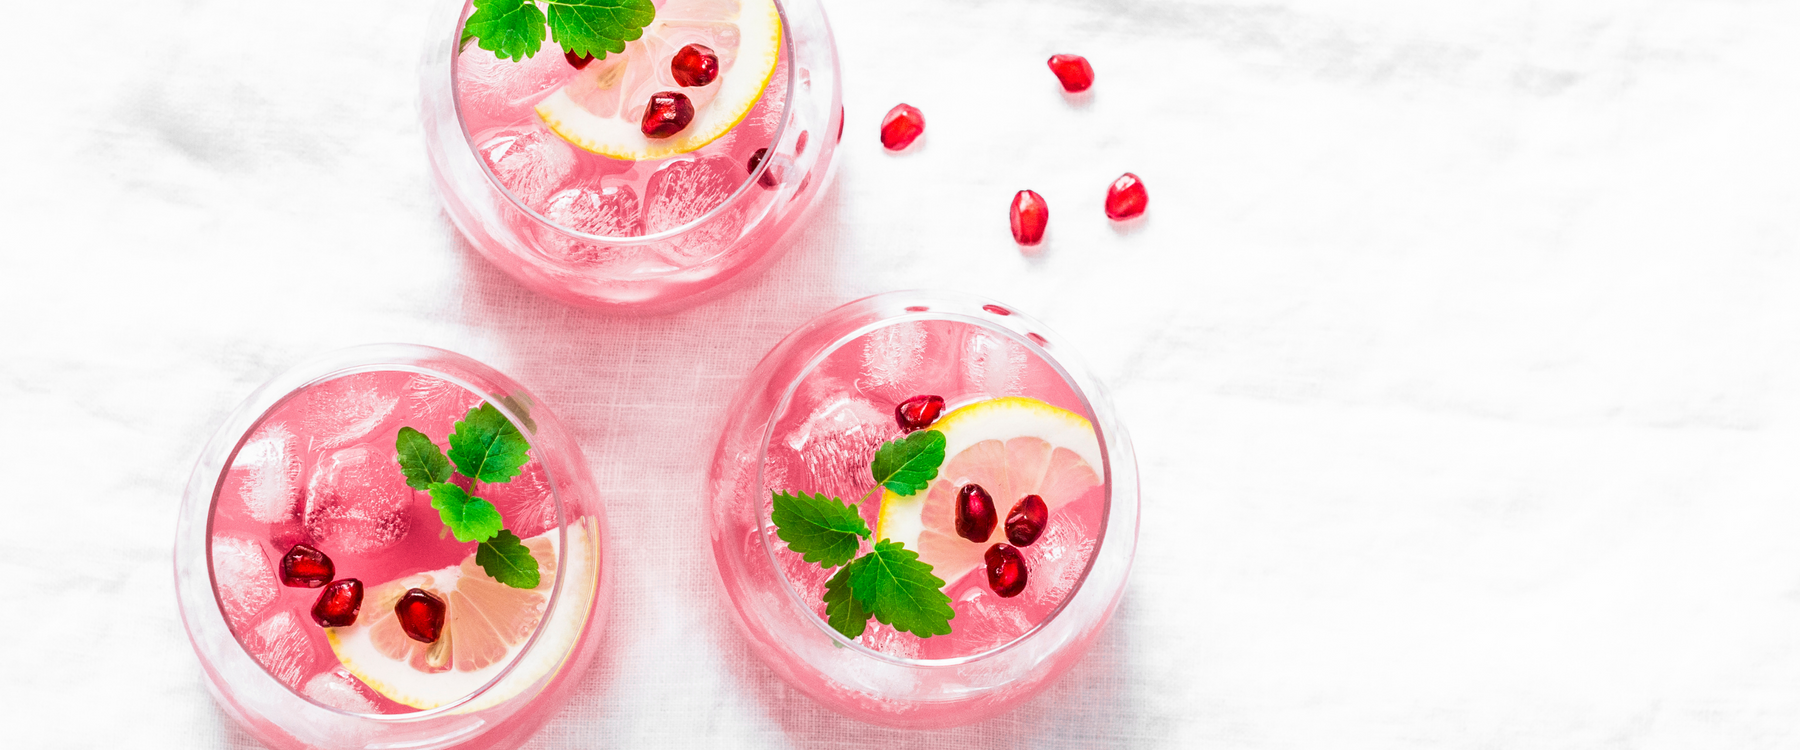 5 Delicious Cocktail Recipes For Those Who Want to Spend Valentine's Day Extra Romantic!